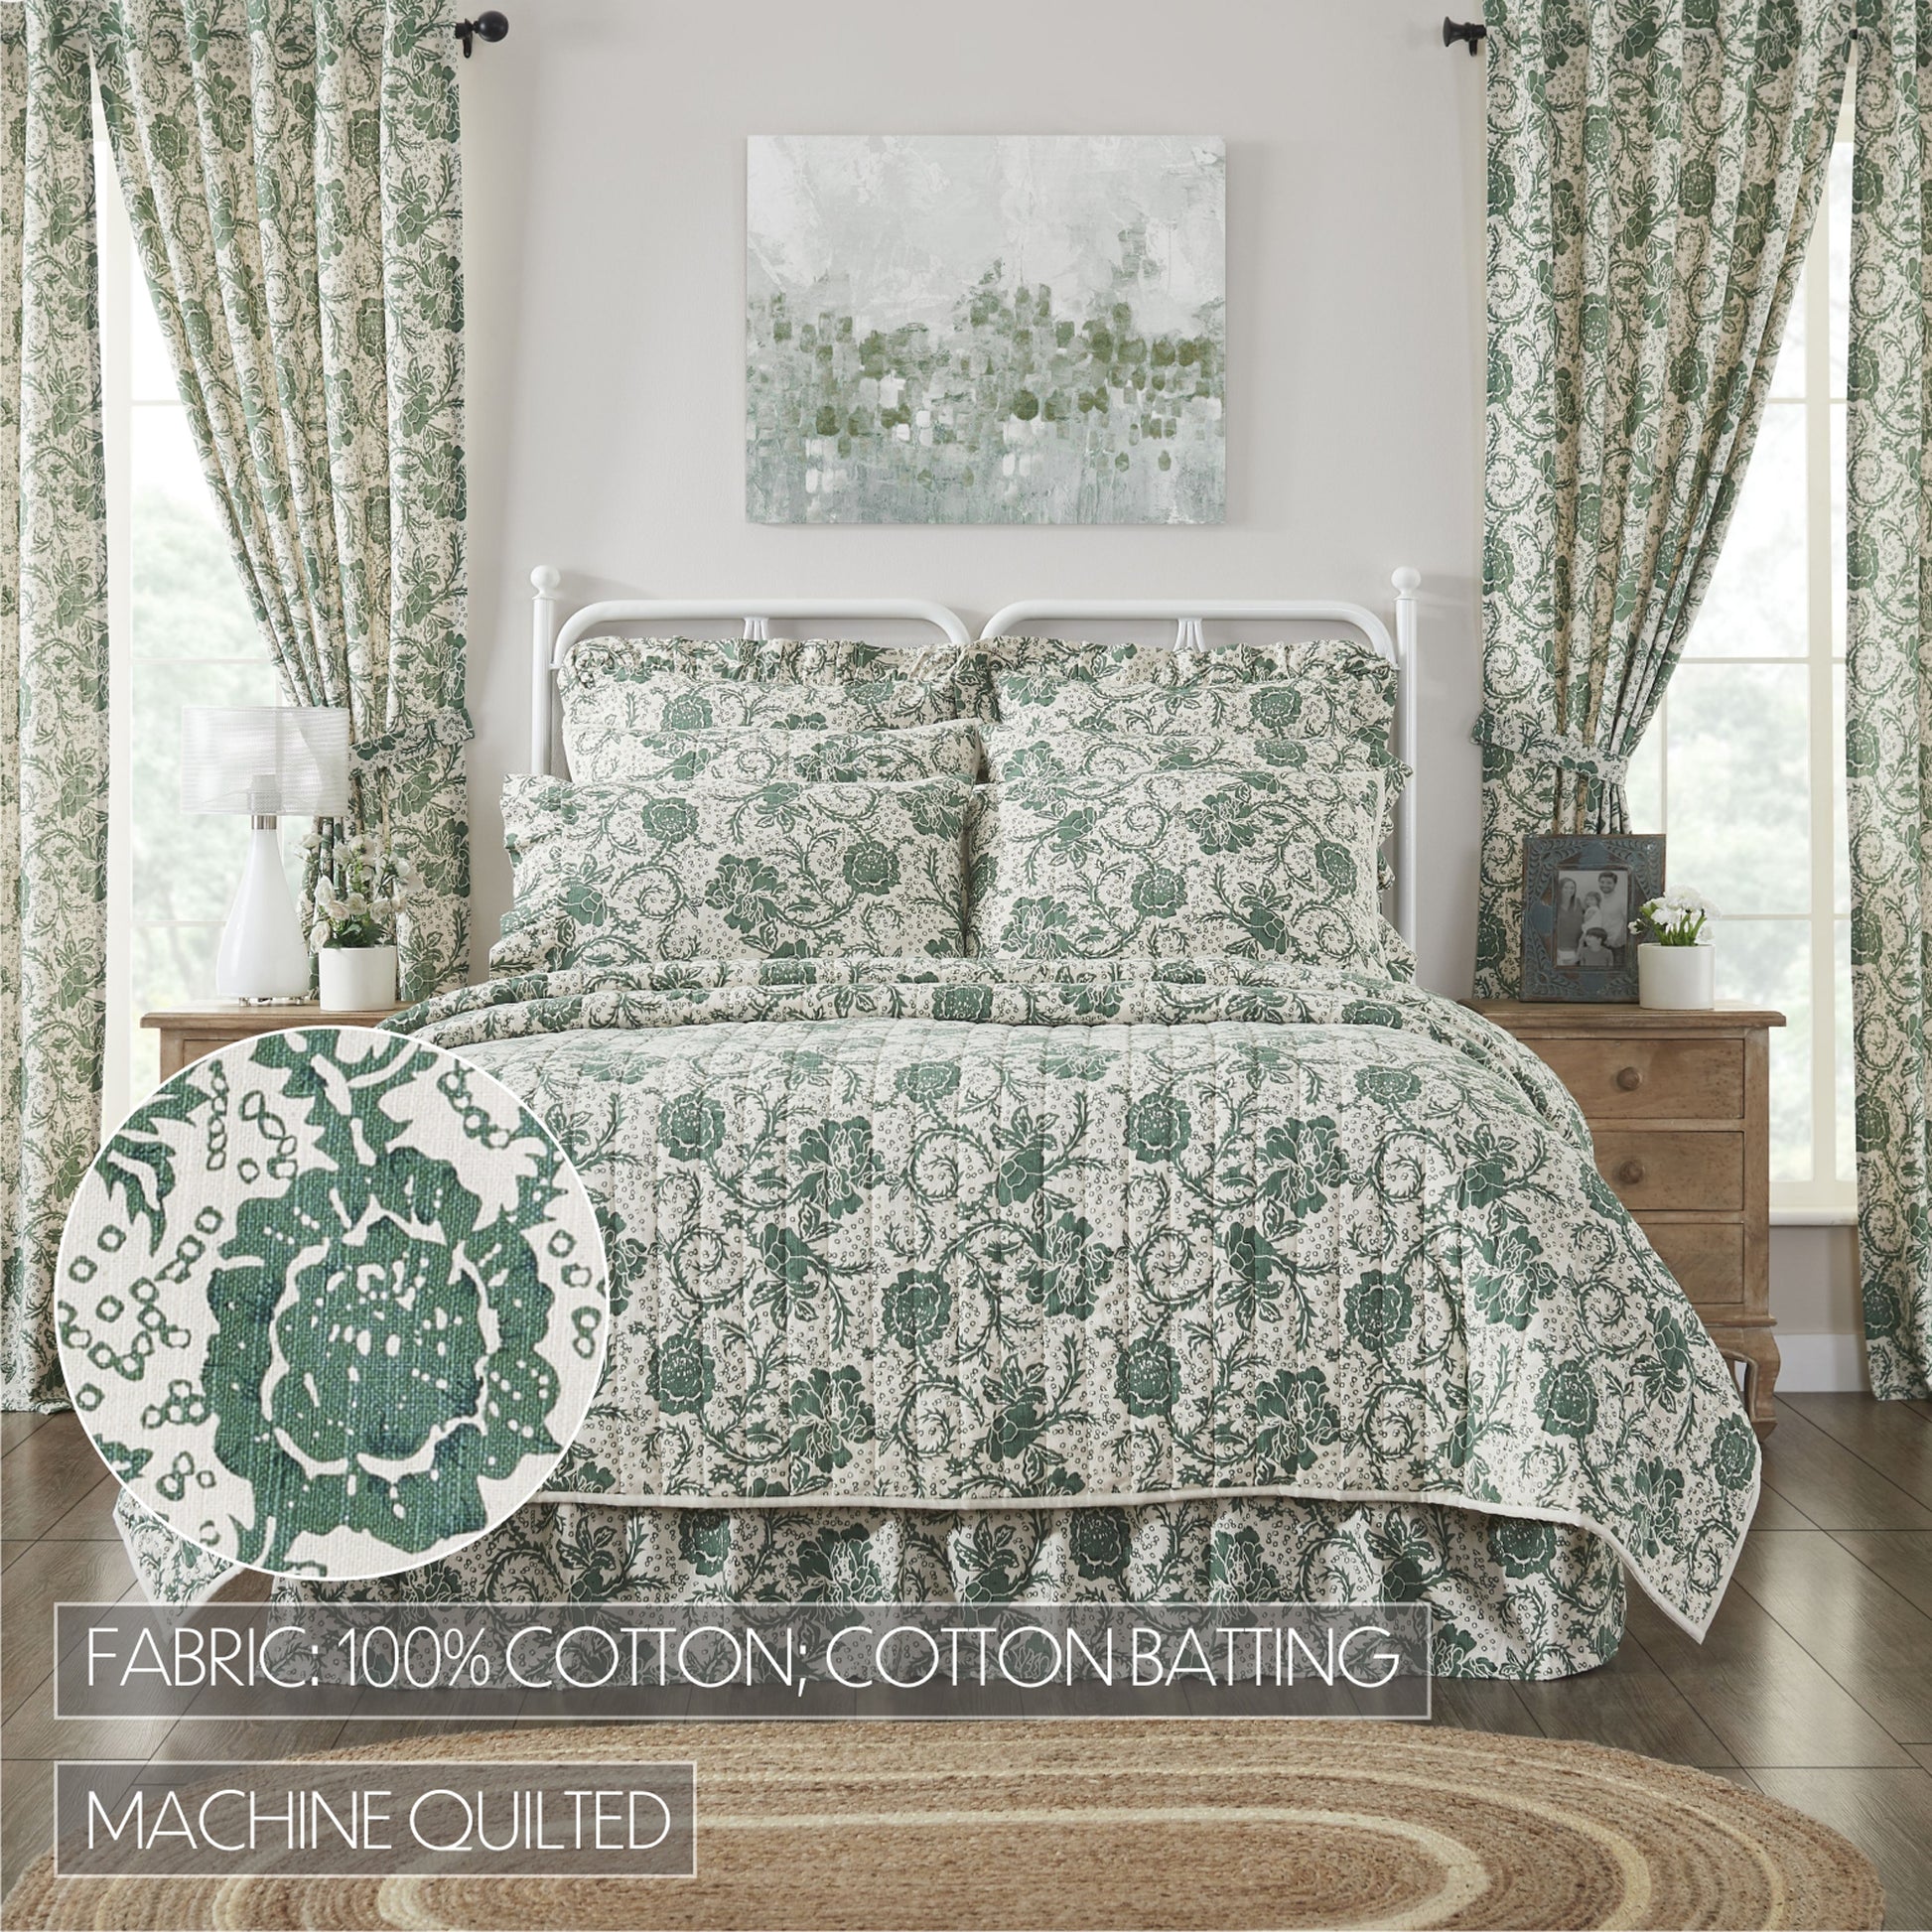 81210-Dorset-Green-Floral-Luxury-King-Quilt-120WX105L-image-2